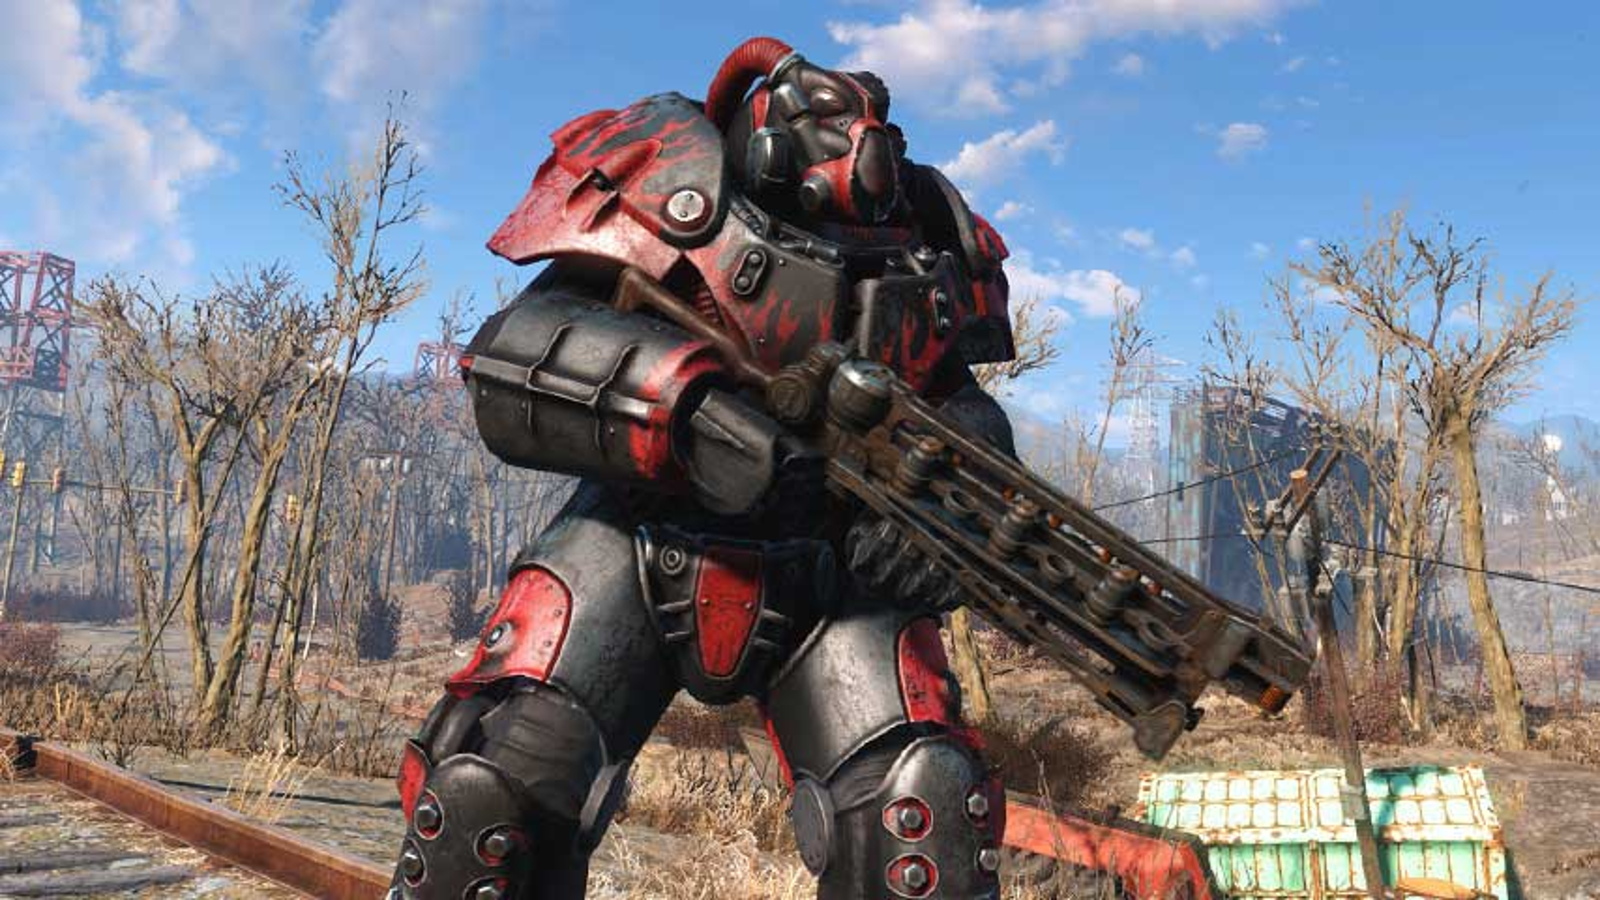 Fallout 4 New Vegas on X: It might be a touch late for April